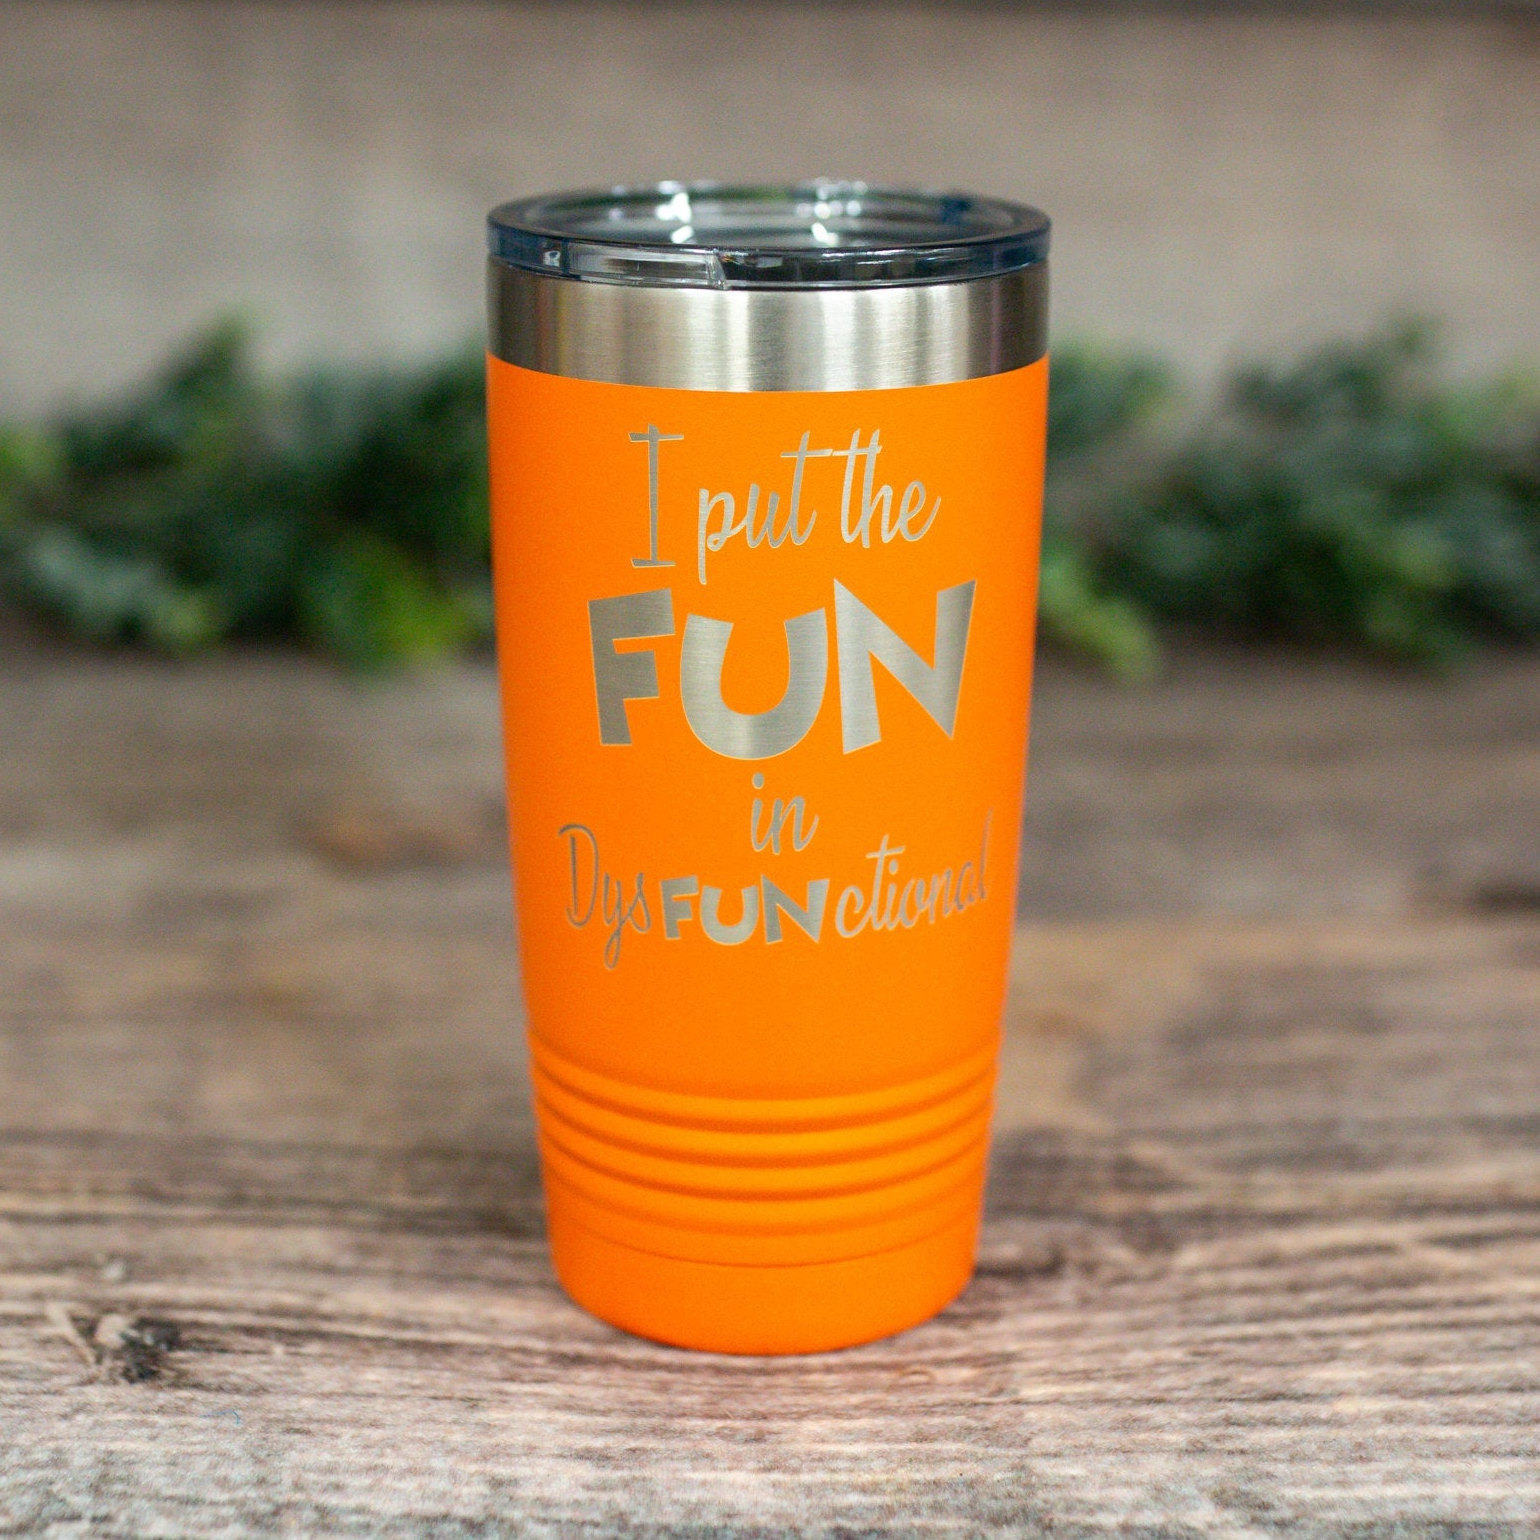 https://3cetching.com/wp-content/uploads/2021/07/i-put-the-fun-in-dysfunctional-engraved-stainless-steel-tumbler-funny-gift-mug-dysfunctional-gift-mug-60f73462.jpg